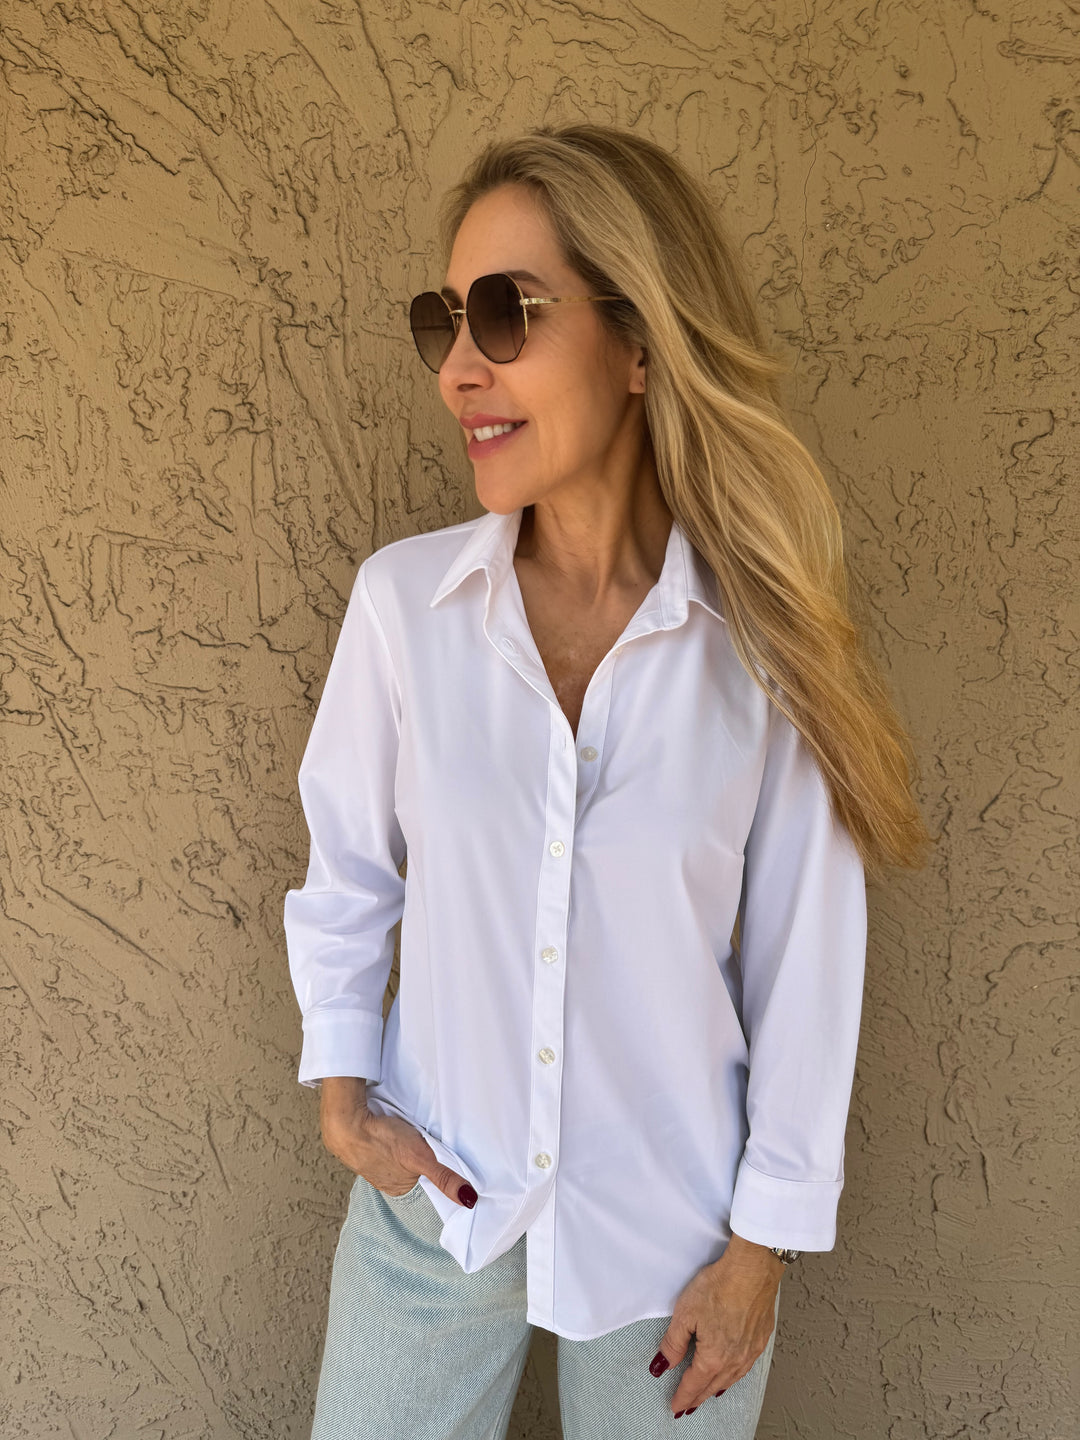 Ameliora Diane 3/4 Sleeve Shirt in White - Front View